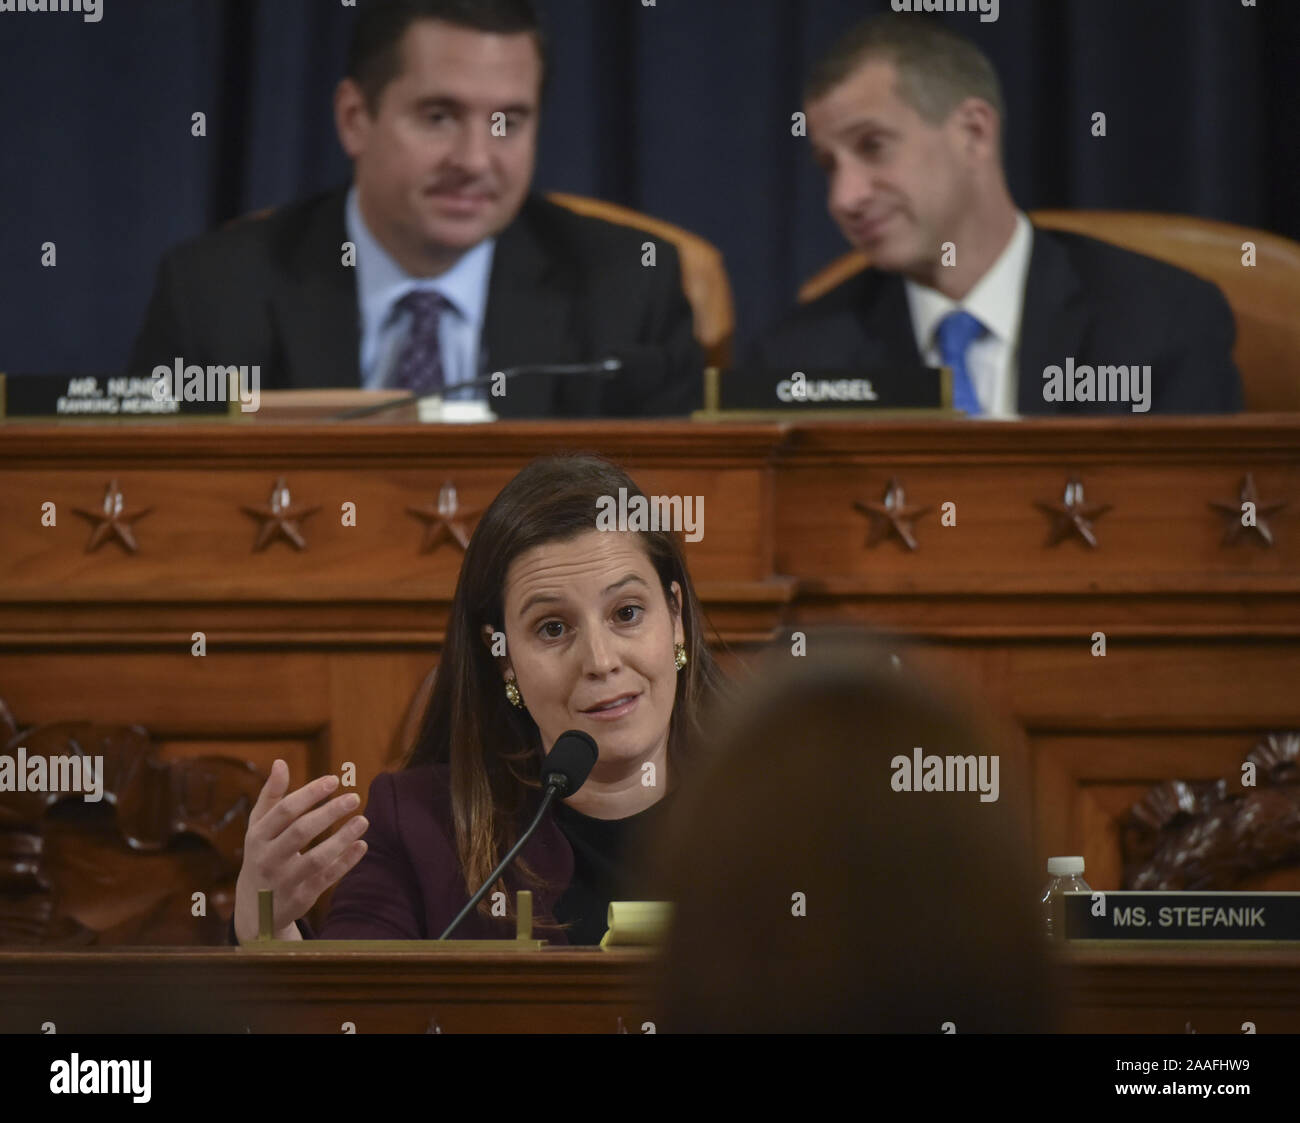 Washington, United States. 21st Nov, 2019. Rep. Elise Stefanik, R-N.Y., questions witnesses during a House Intelligence Committee impeachment inquiry hearing on Capitol Hill in Washington, DC on Thursday, November 21, 2019. The committee is receiving testimony from nine witnesses in open hearings this week in the impeachment inquiry into President Donald Trump. Credit: UPI/Alamy Live News Stock Photo